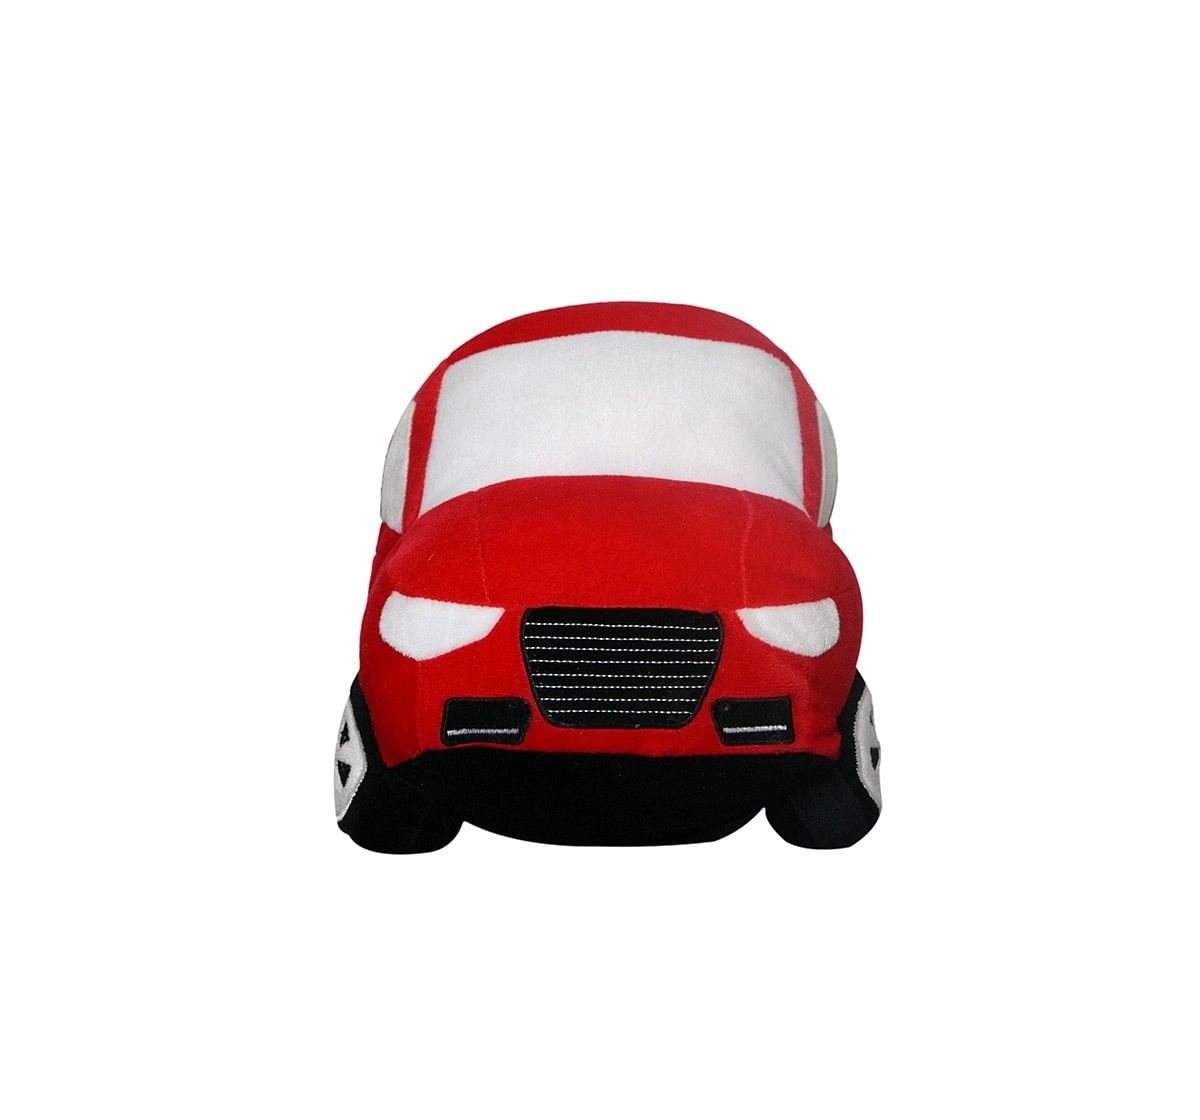 Soft Buddies Big Car Red Quirky Soft Toys for Kids age 12M+ - 22.86 Cm 